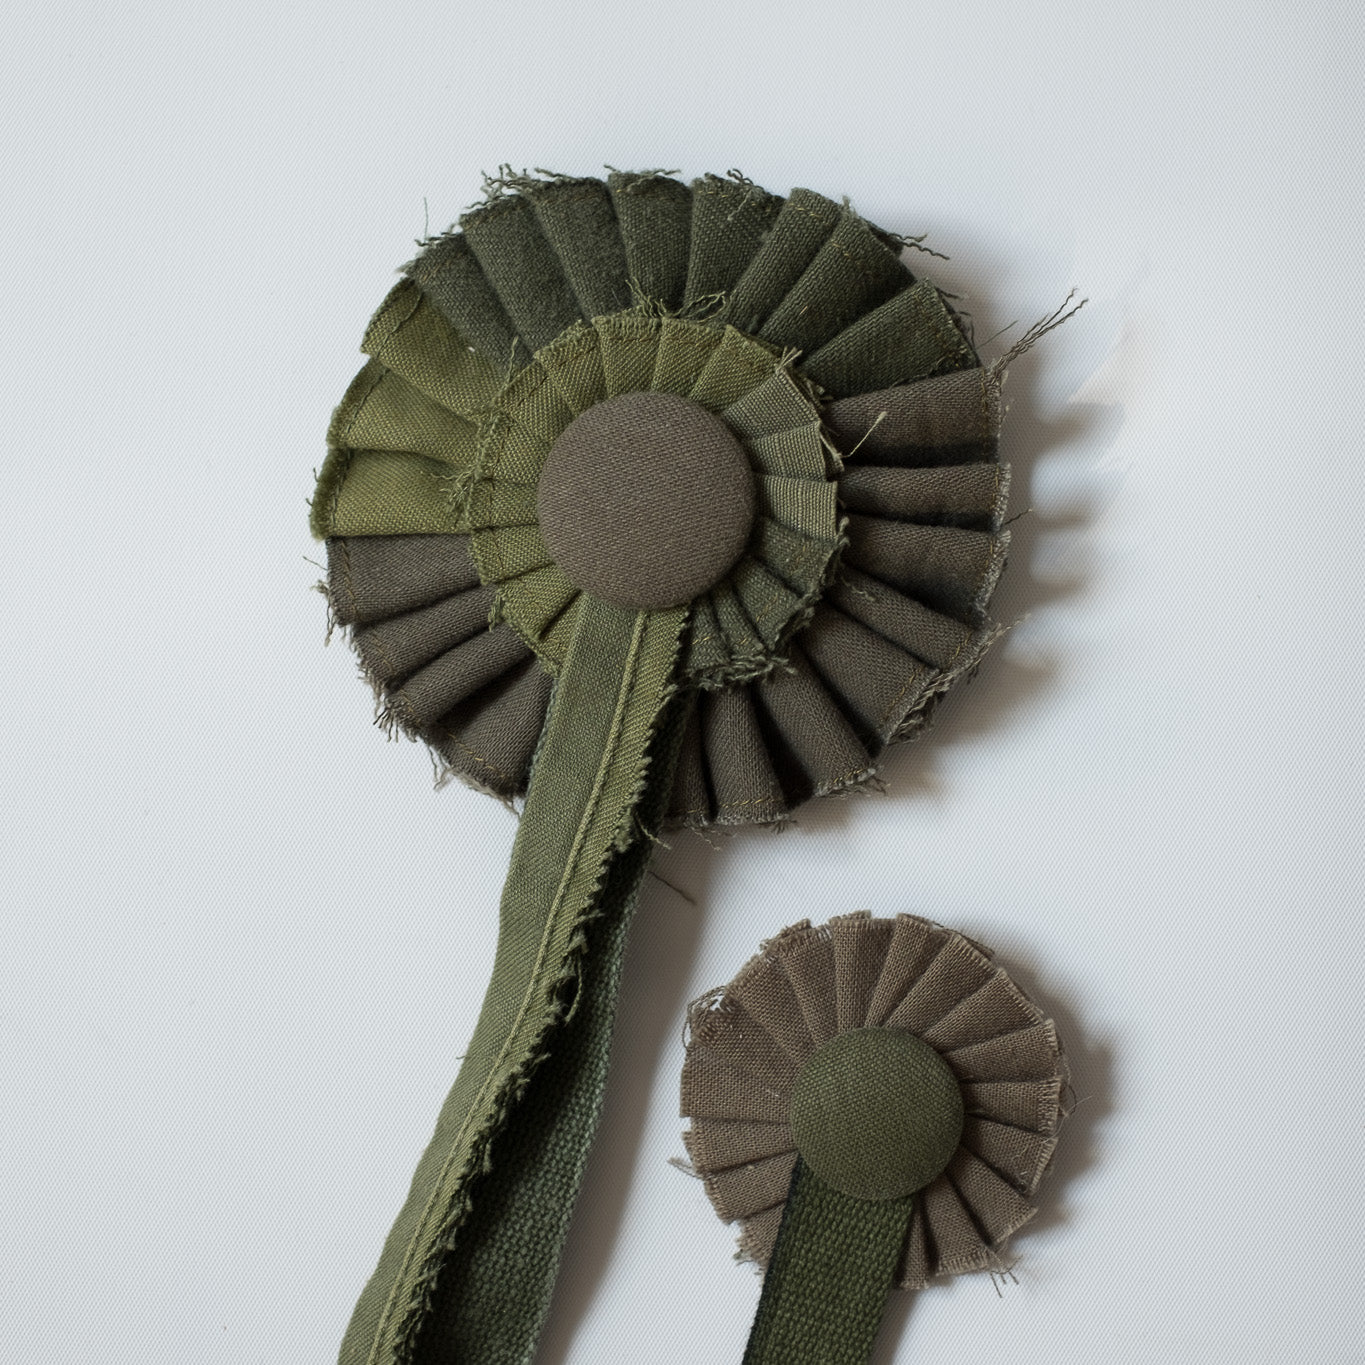 Take Product ROSETTE "MILITARY" A